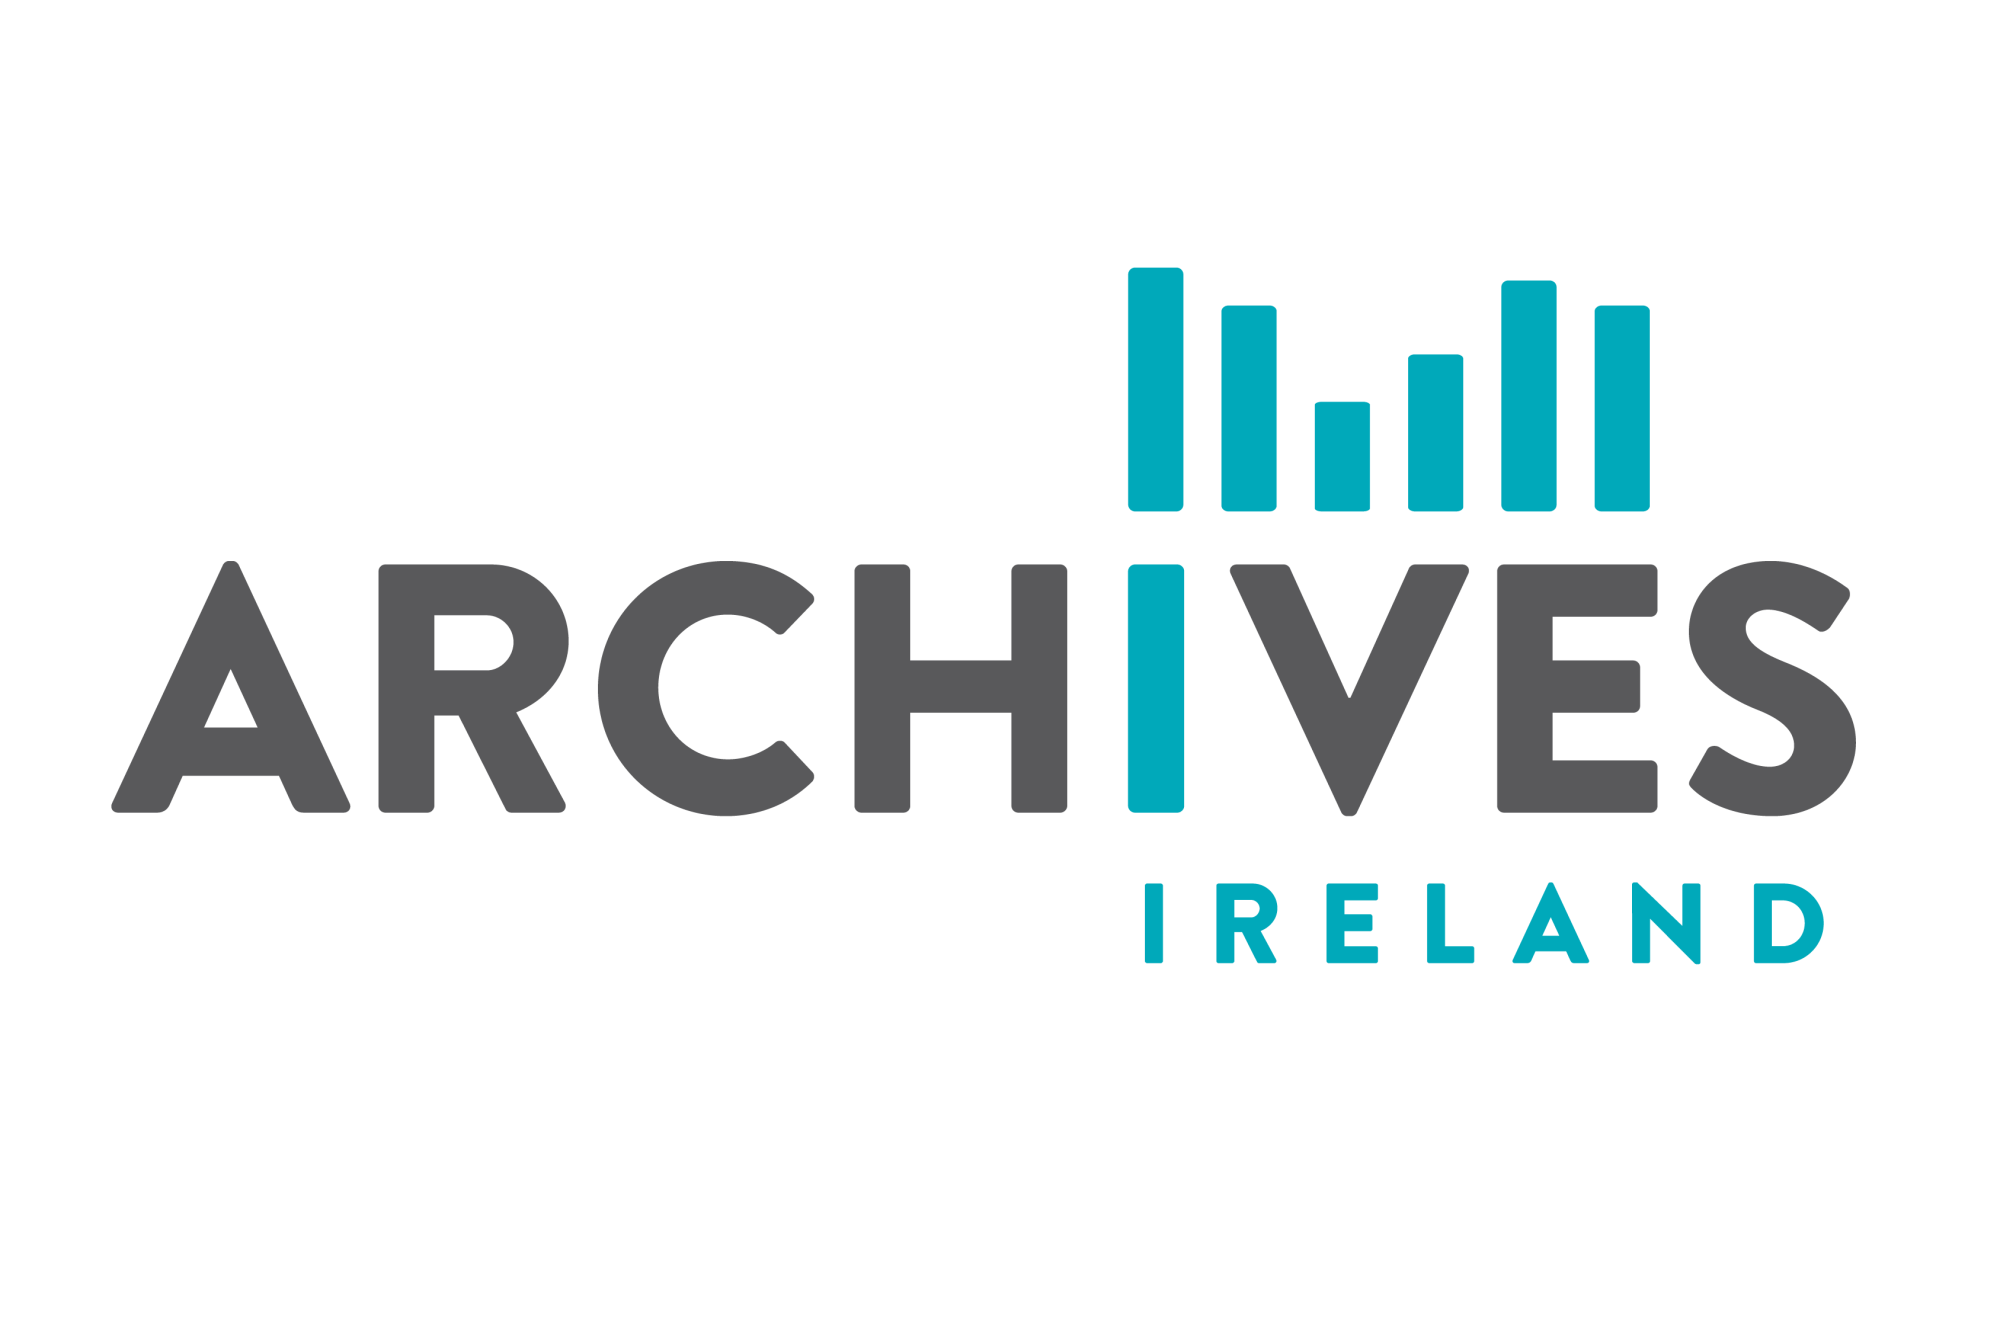 Archives Ireland // www.archives.ie